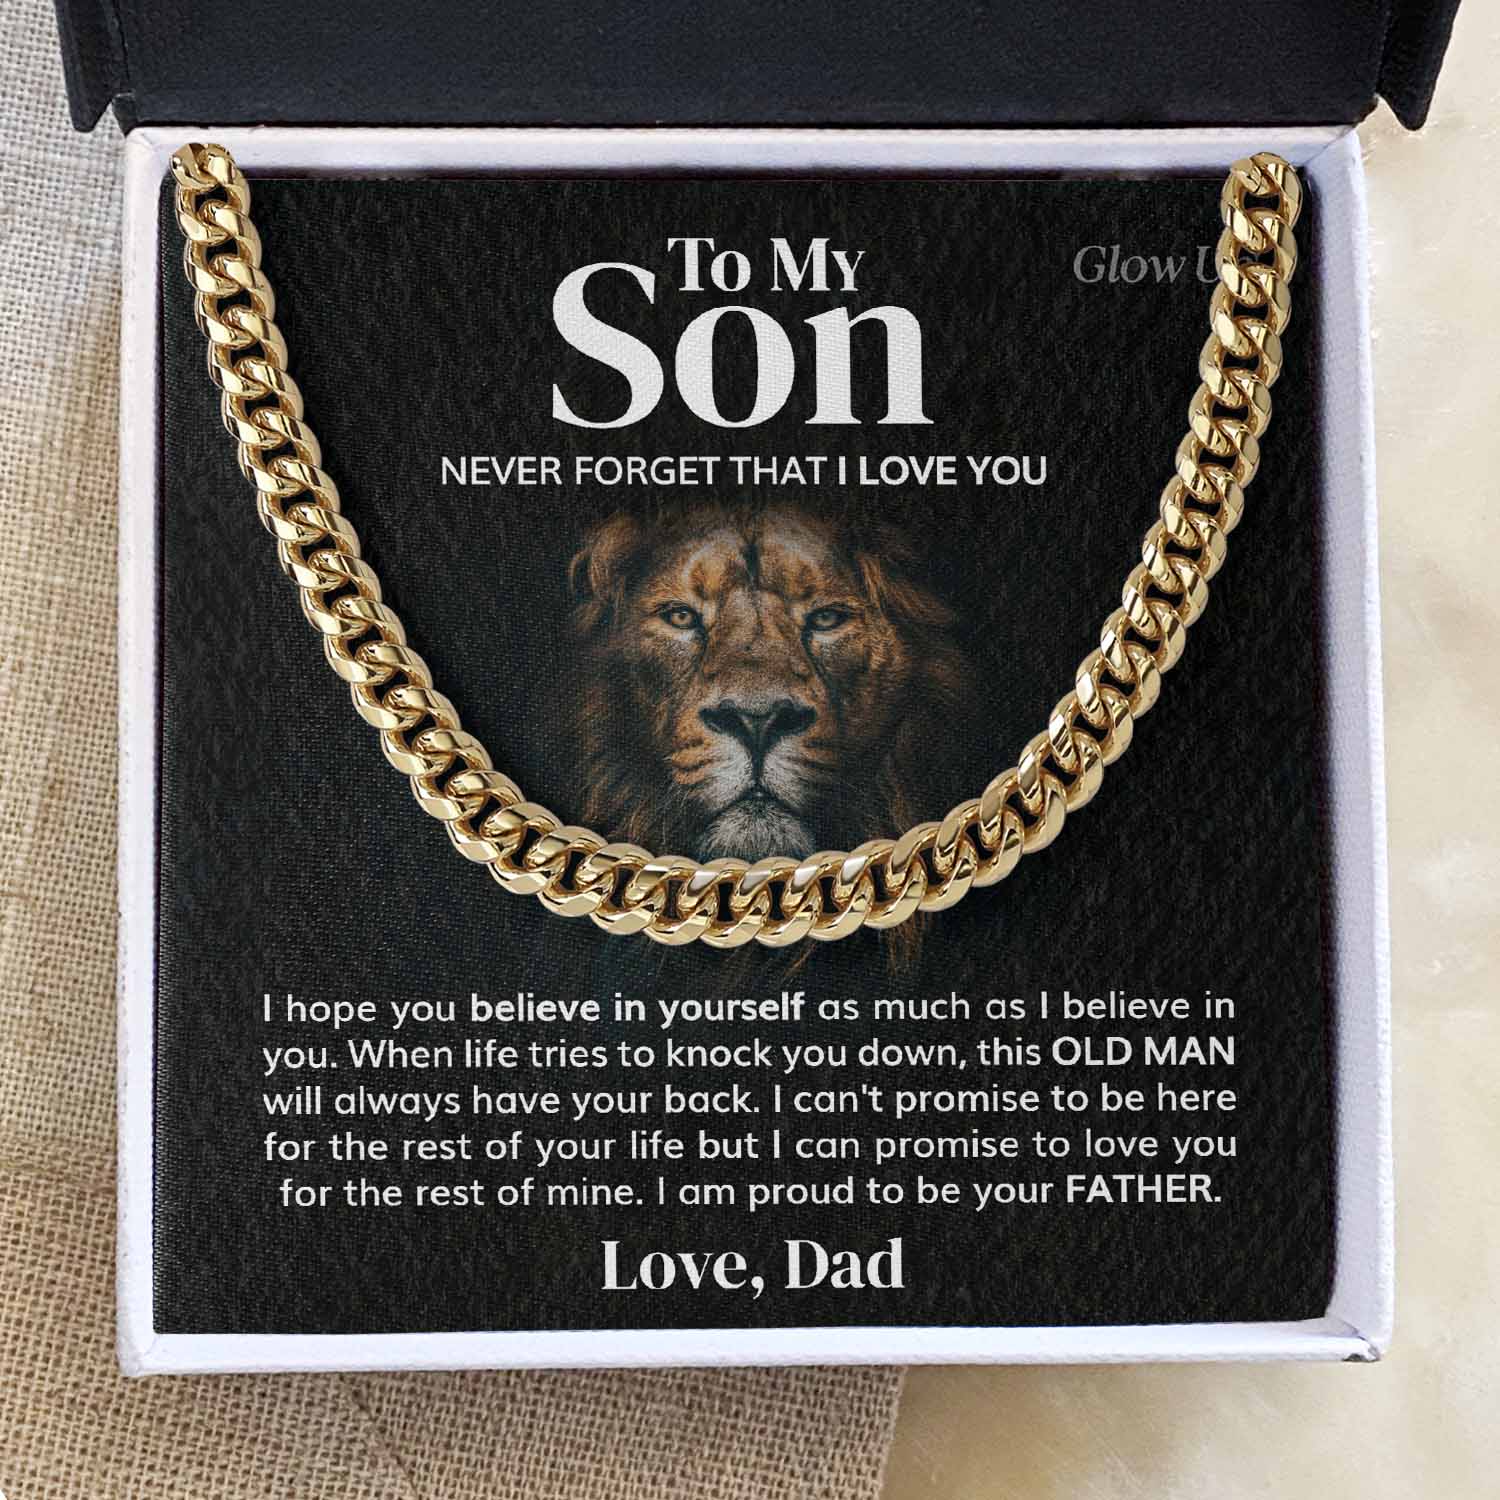 GlowUp Cuban Link Chain 18k Gold Finish / Two-Toned Box Believe in Yourself Cuban Chain Necklace | Strengthen Dad-Son Bond